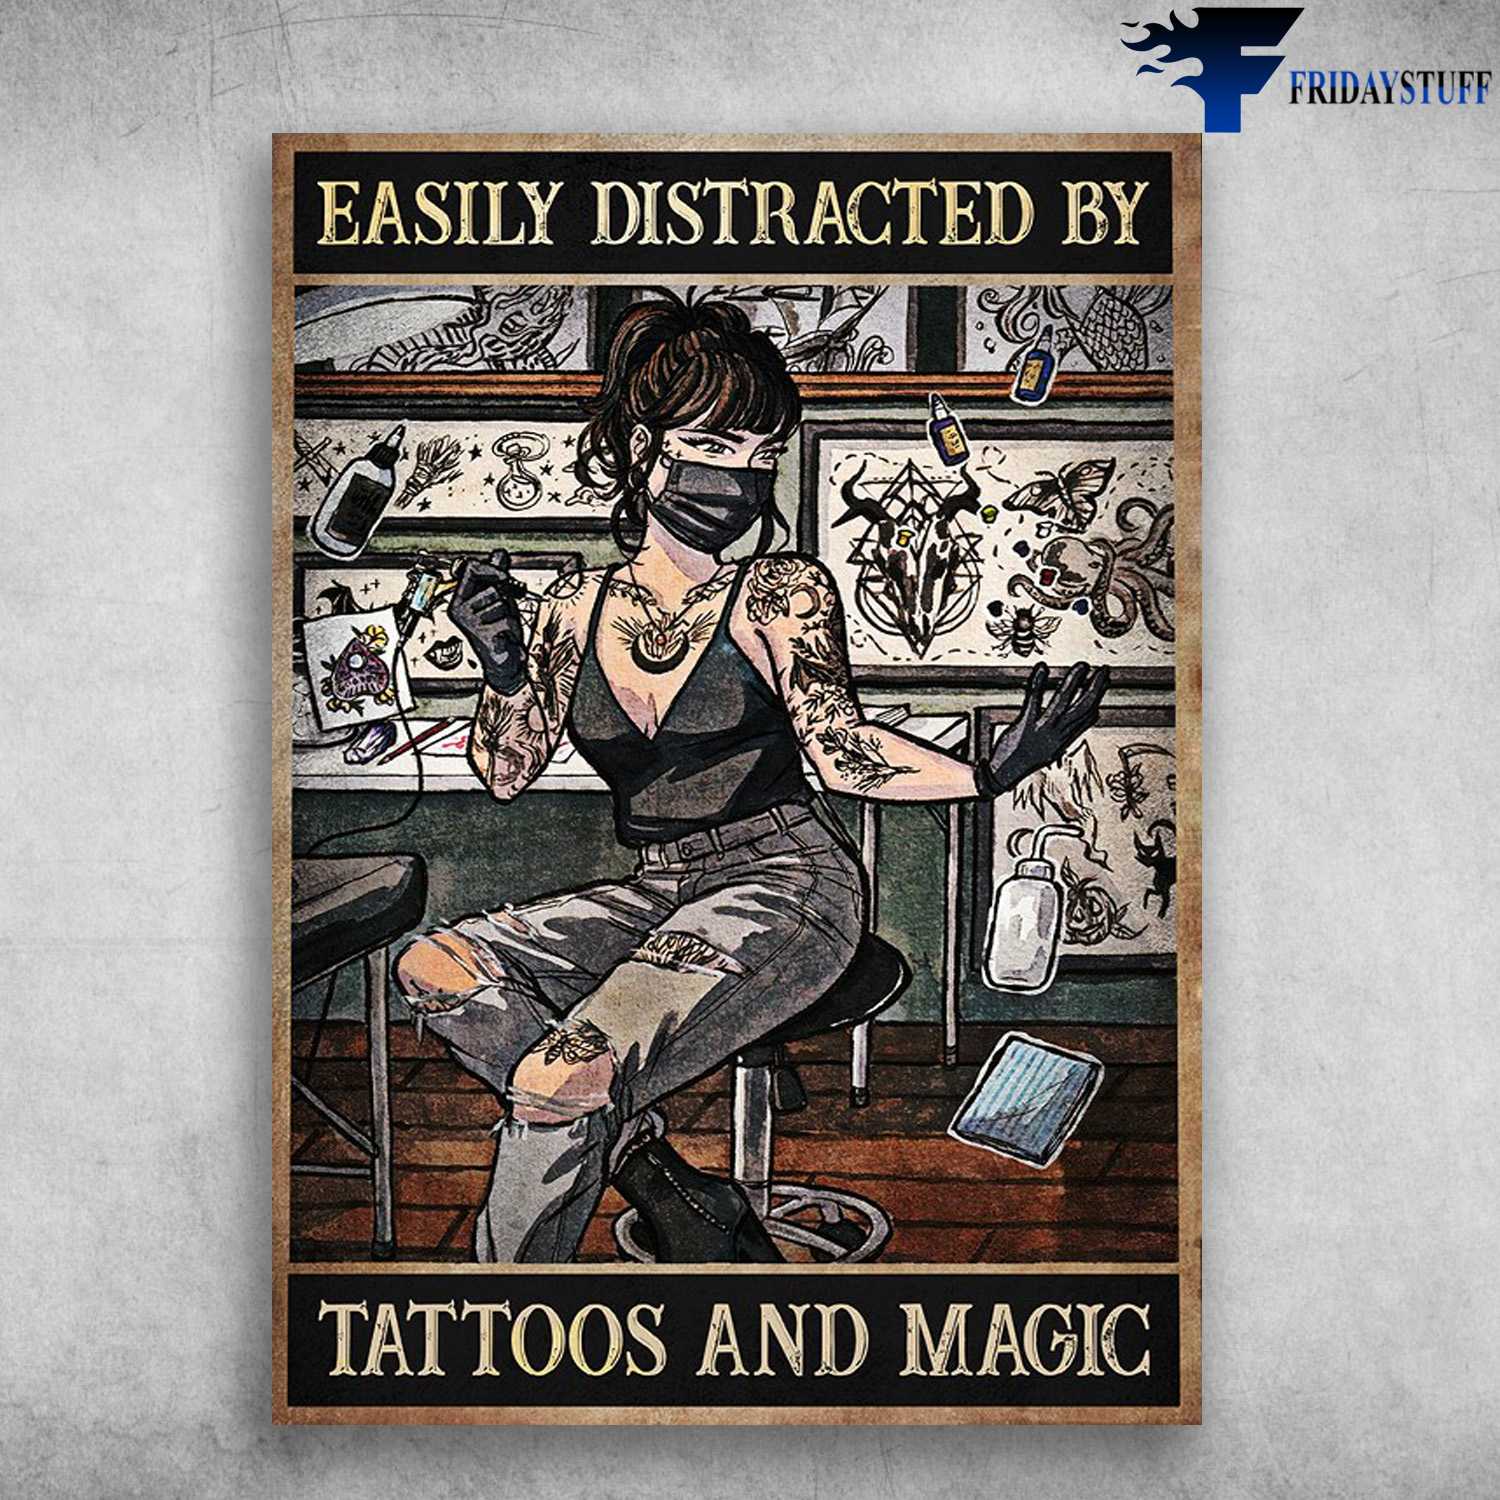 Tattoo Girl, Tattoo Magician - Easily Distracted By, Tattoos And Magic